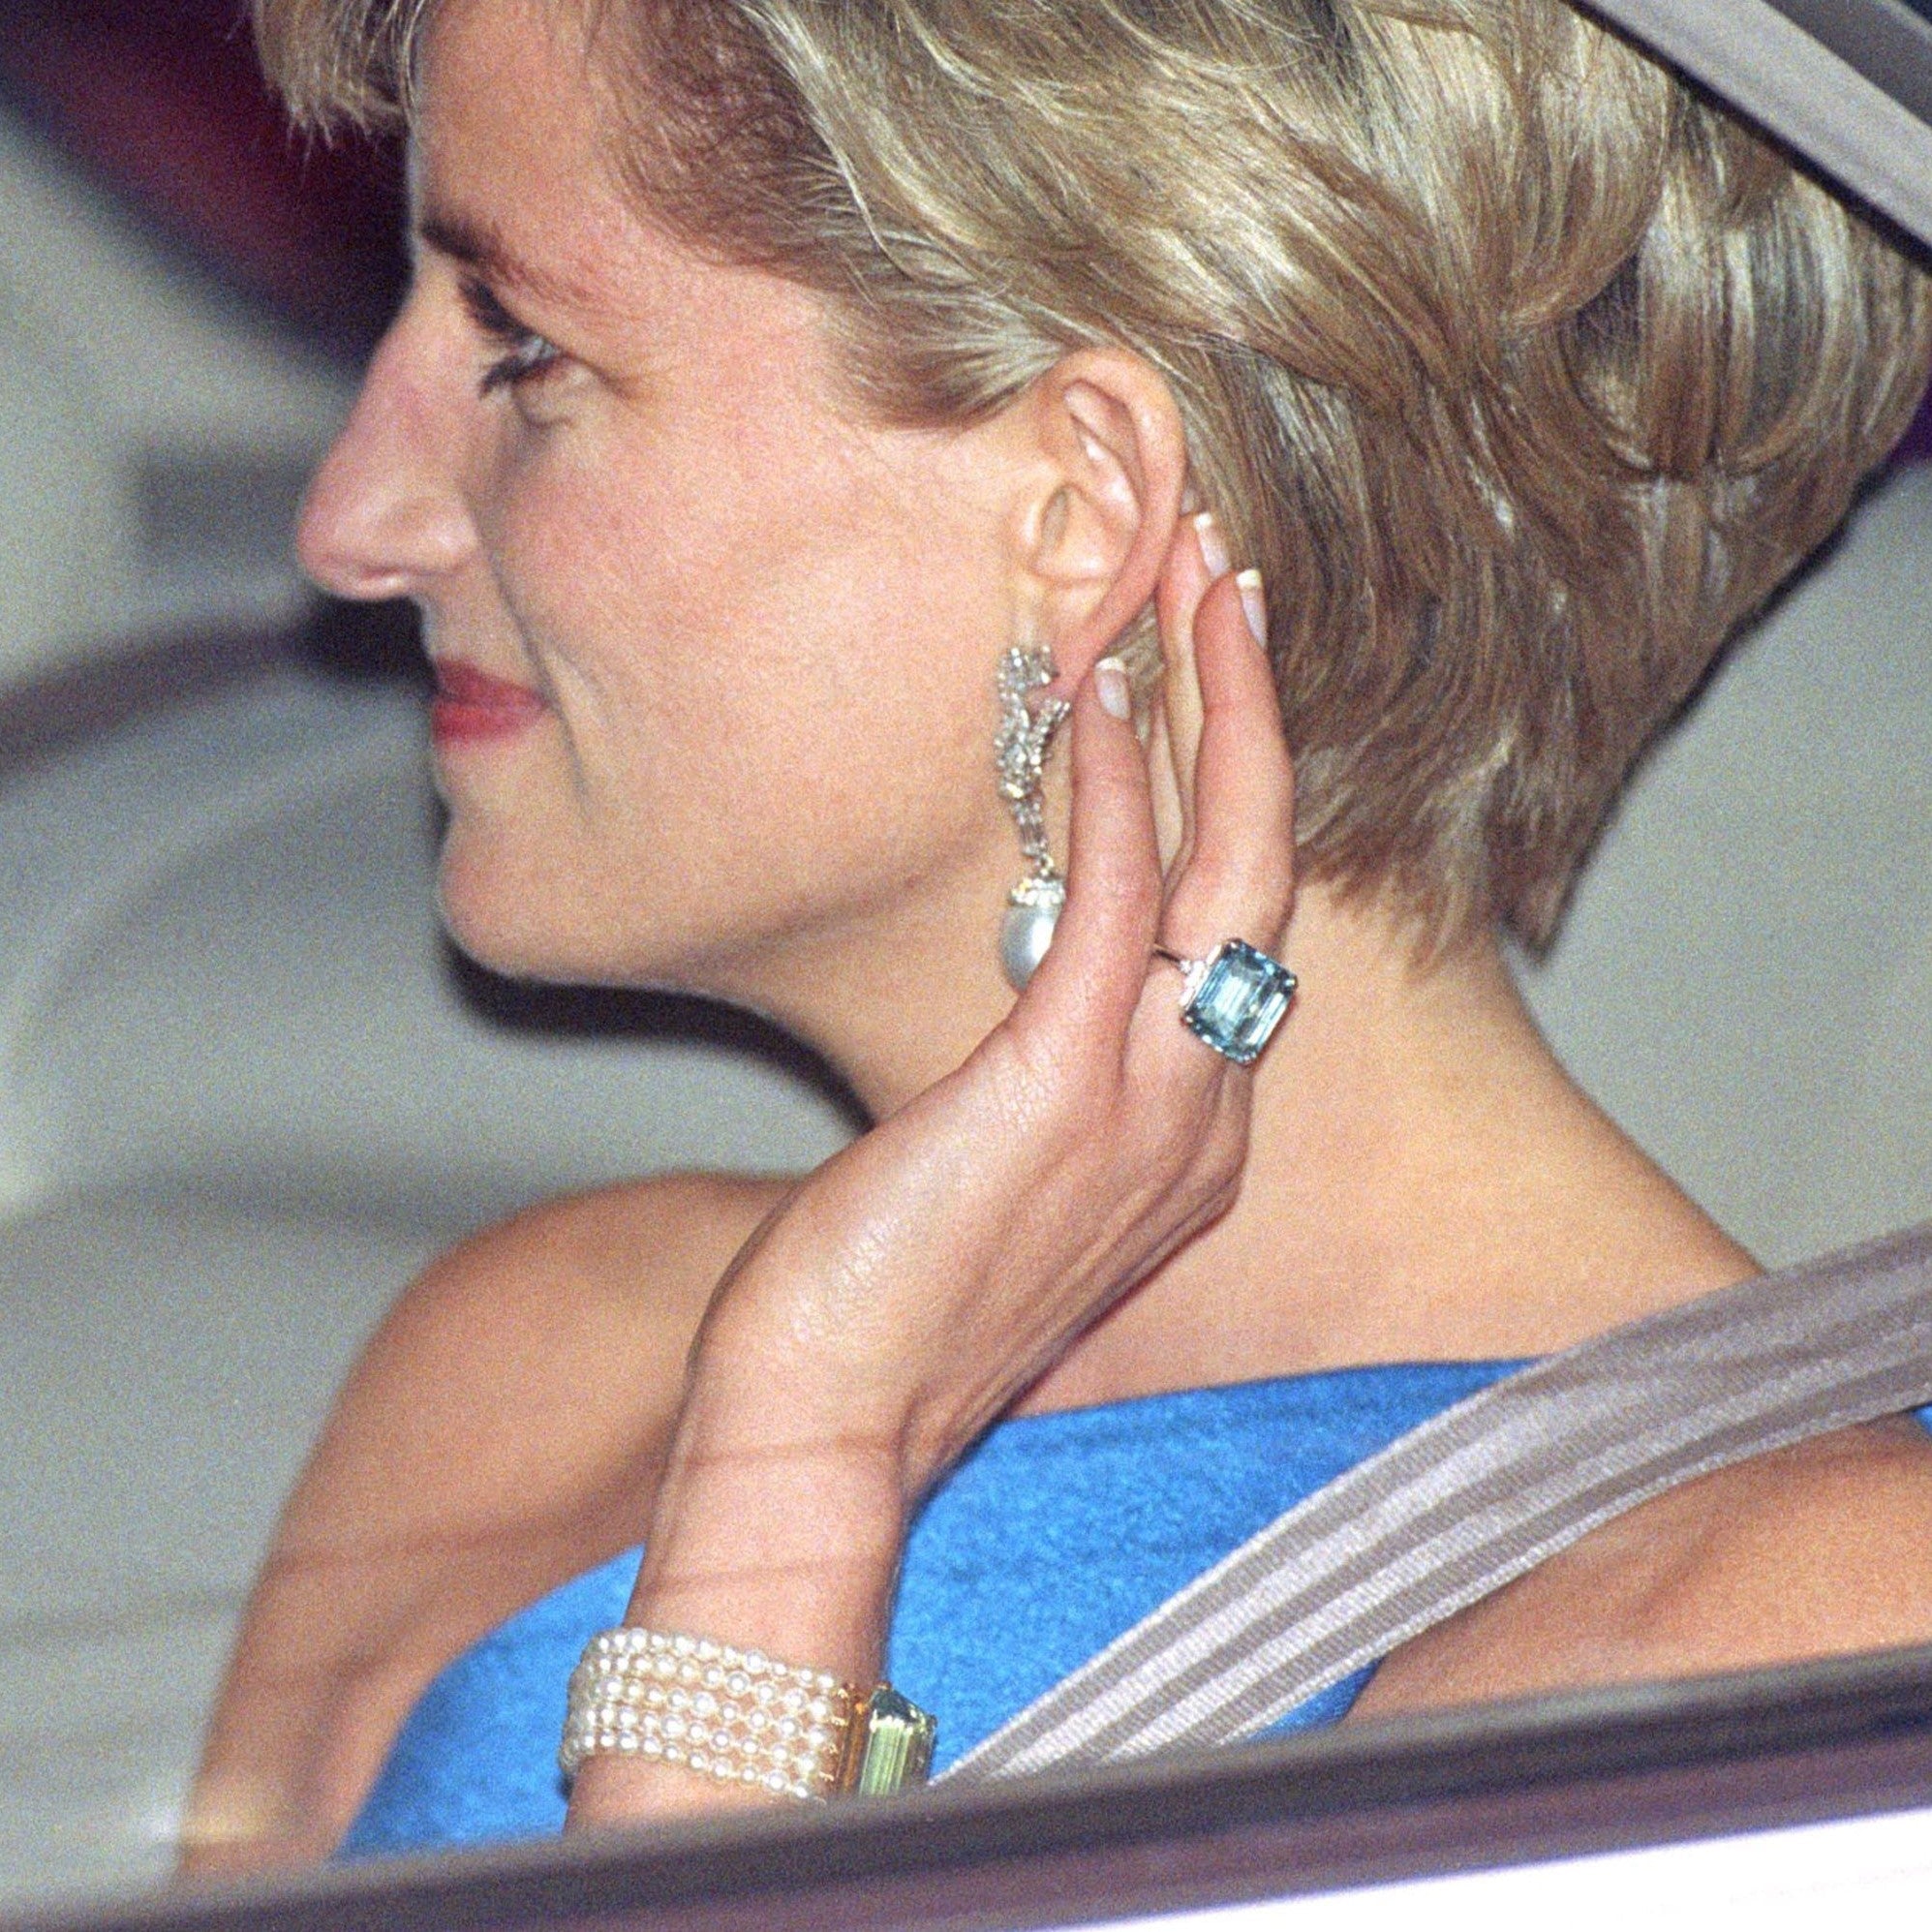 Get the Look: Jewelry Inspo feat Princess Diana, Kate Middleton, and Megan Markle - Estella Collection